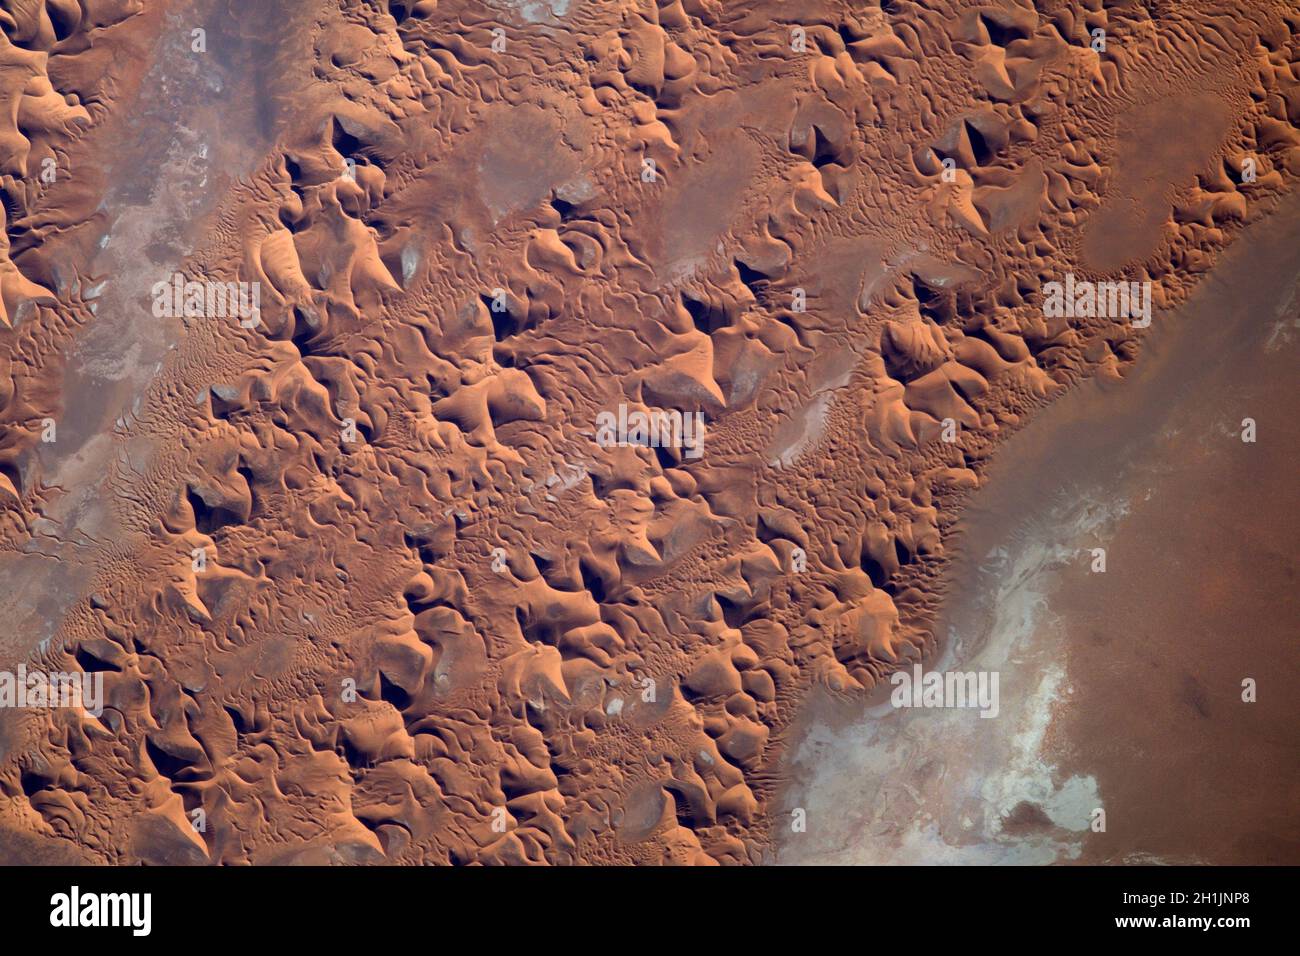 A view of Earth from the International Space Station: Saharan sand Dunes, the Sahara desert. An optimised and digitally enhanced version of a NASA/ ESA image. Mandatory Credit: NASA/ESA/T. Pesquet. NB: Usage restrictions: Not to be presented as an endorsement. Stock Photo